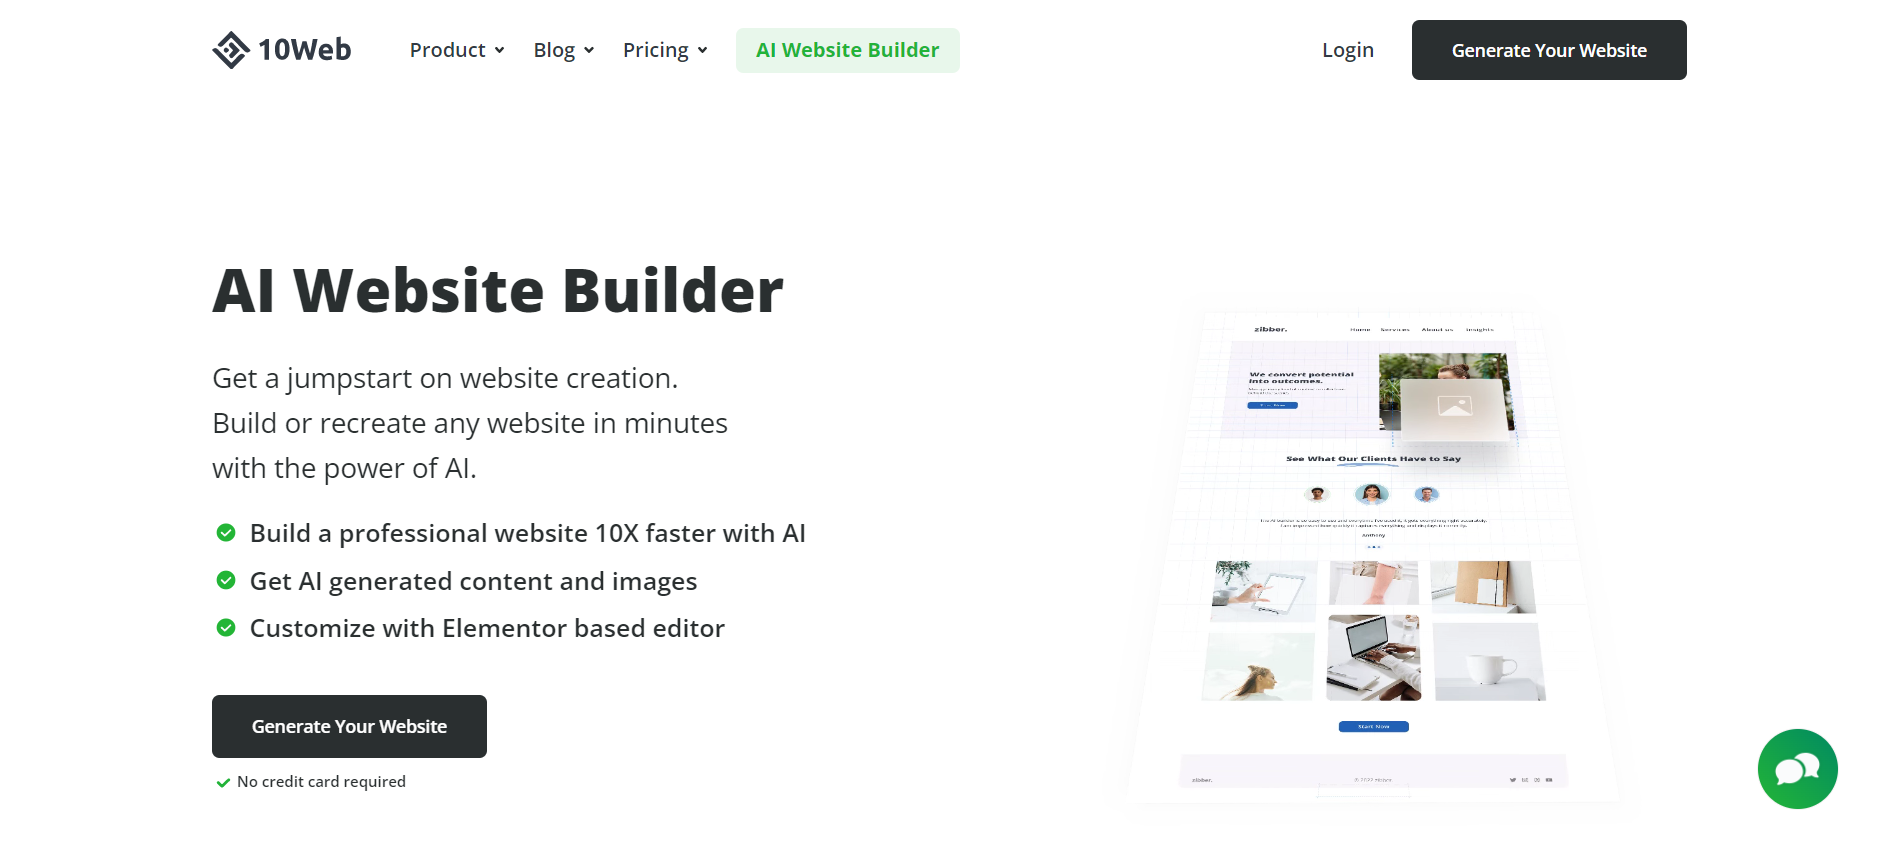 What is 10Web AI Website Builder